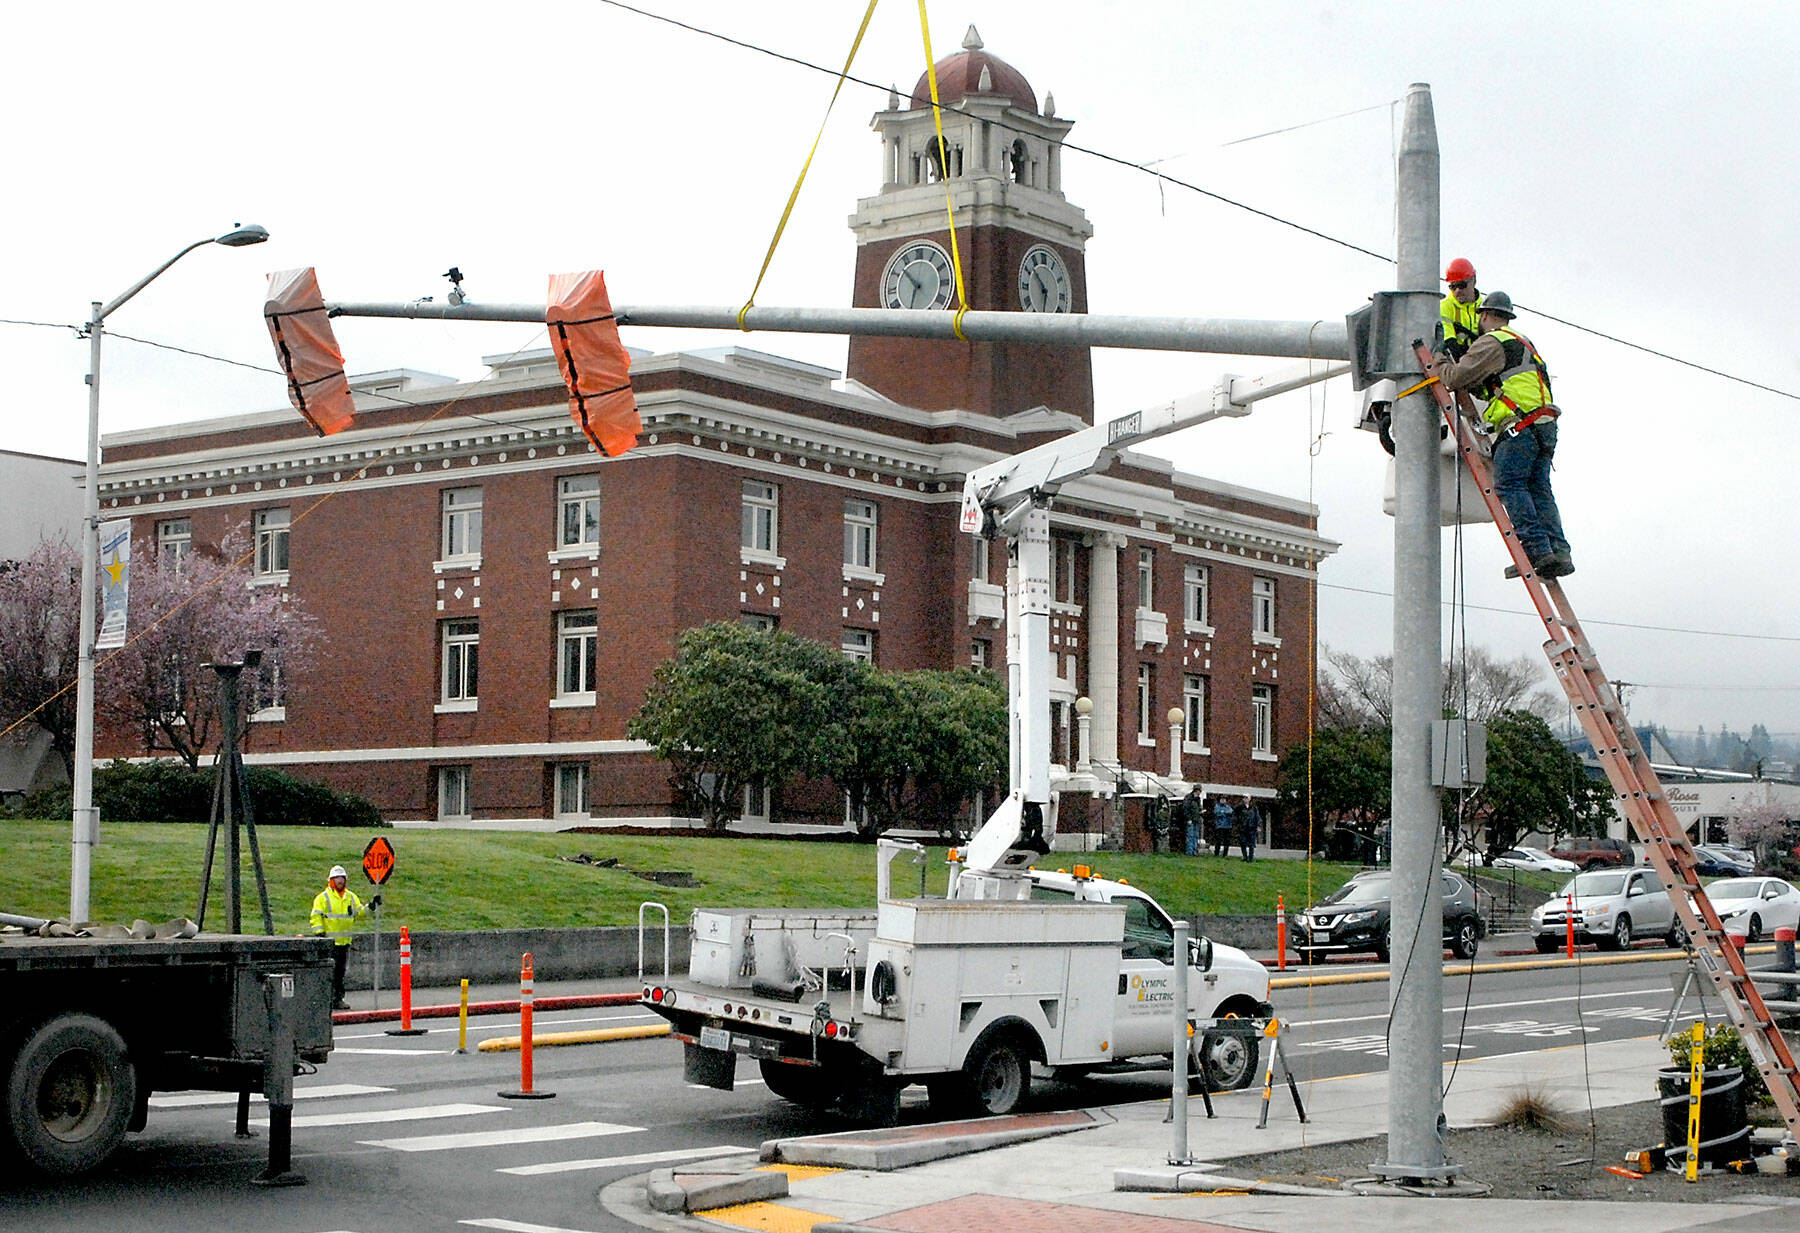 A construction crew installs a new traffic light at the corner of Lincoln and Third streets on Tuesday as a traffic improvement project along South Lincoln Street resumes. The project, which includes traffic dividers, lane revisions, sidewalks and crosswalks, began in 2021 and is expected to now add a traffic light and pedestrian crossing flashing light, with work through mid-April. Motorists can expect periodic detours and traffic delays during construction. (Keith Thorpe/Peninsula Daily News)